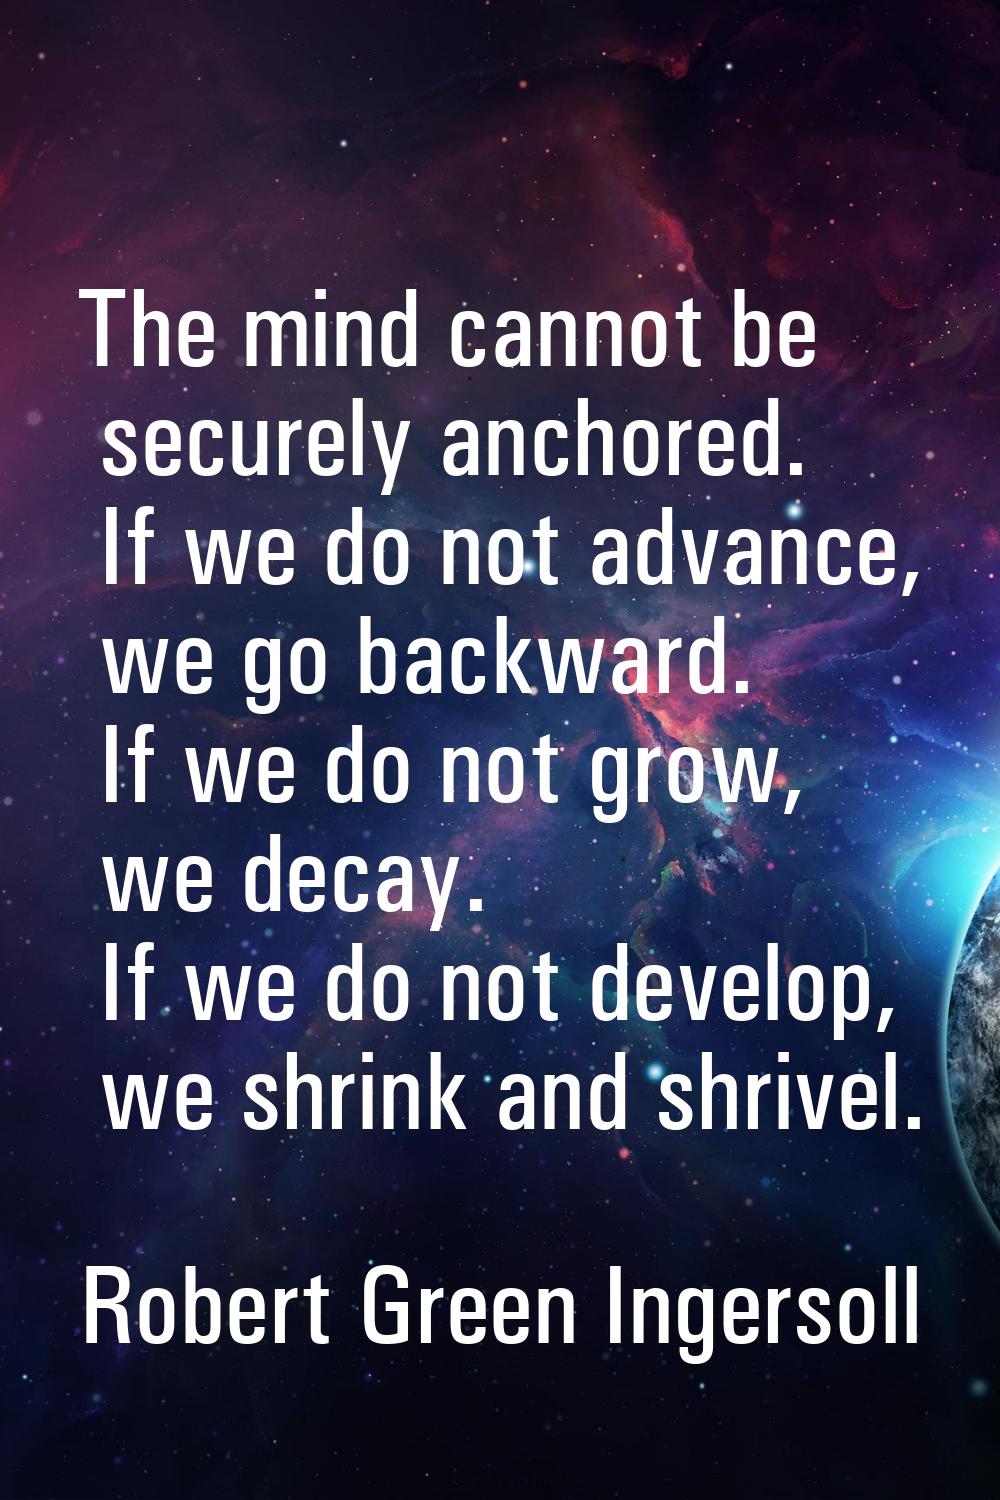 The mind cannot be securely anchored. If we do not advance, we go backward. If we do not grow, we d